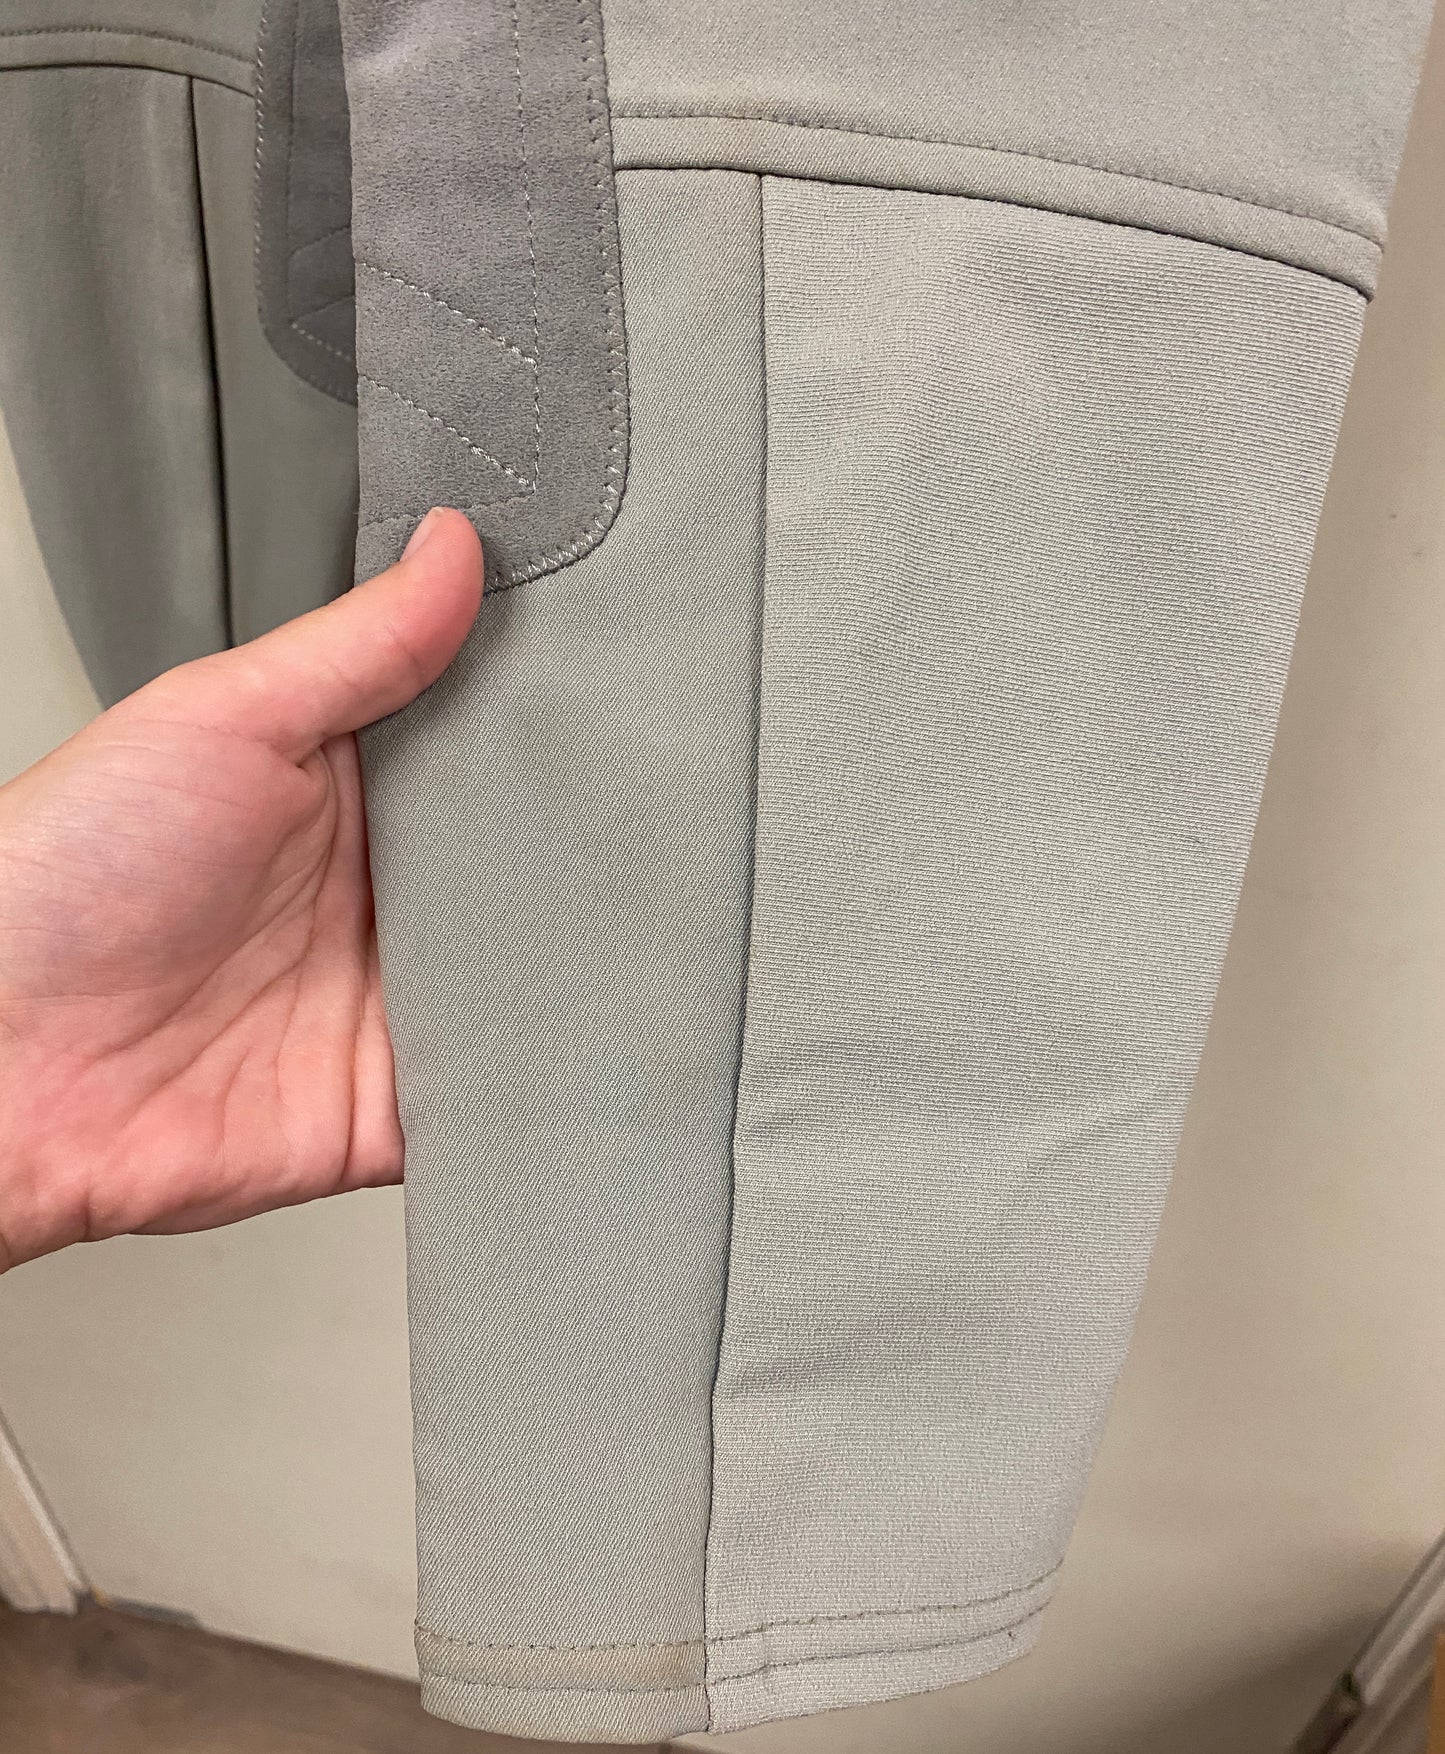 22R NEW Ariat Pro Series Pro Circuit Low Rise Gray Knee Patch Breeches